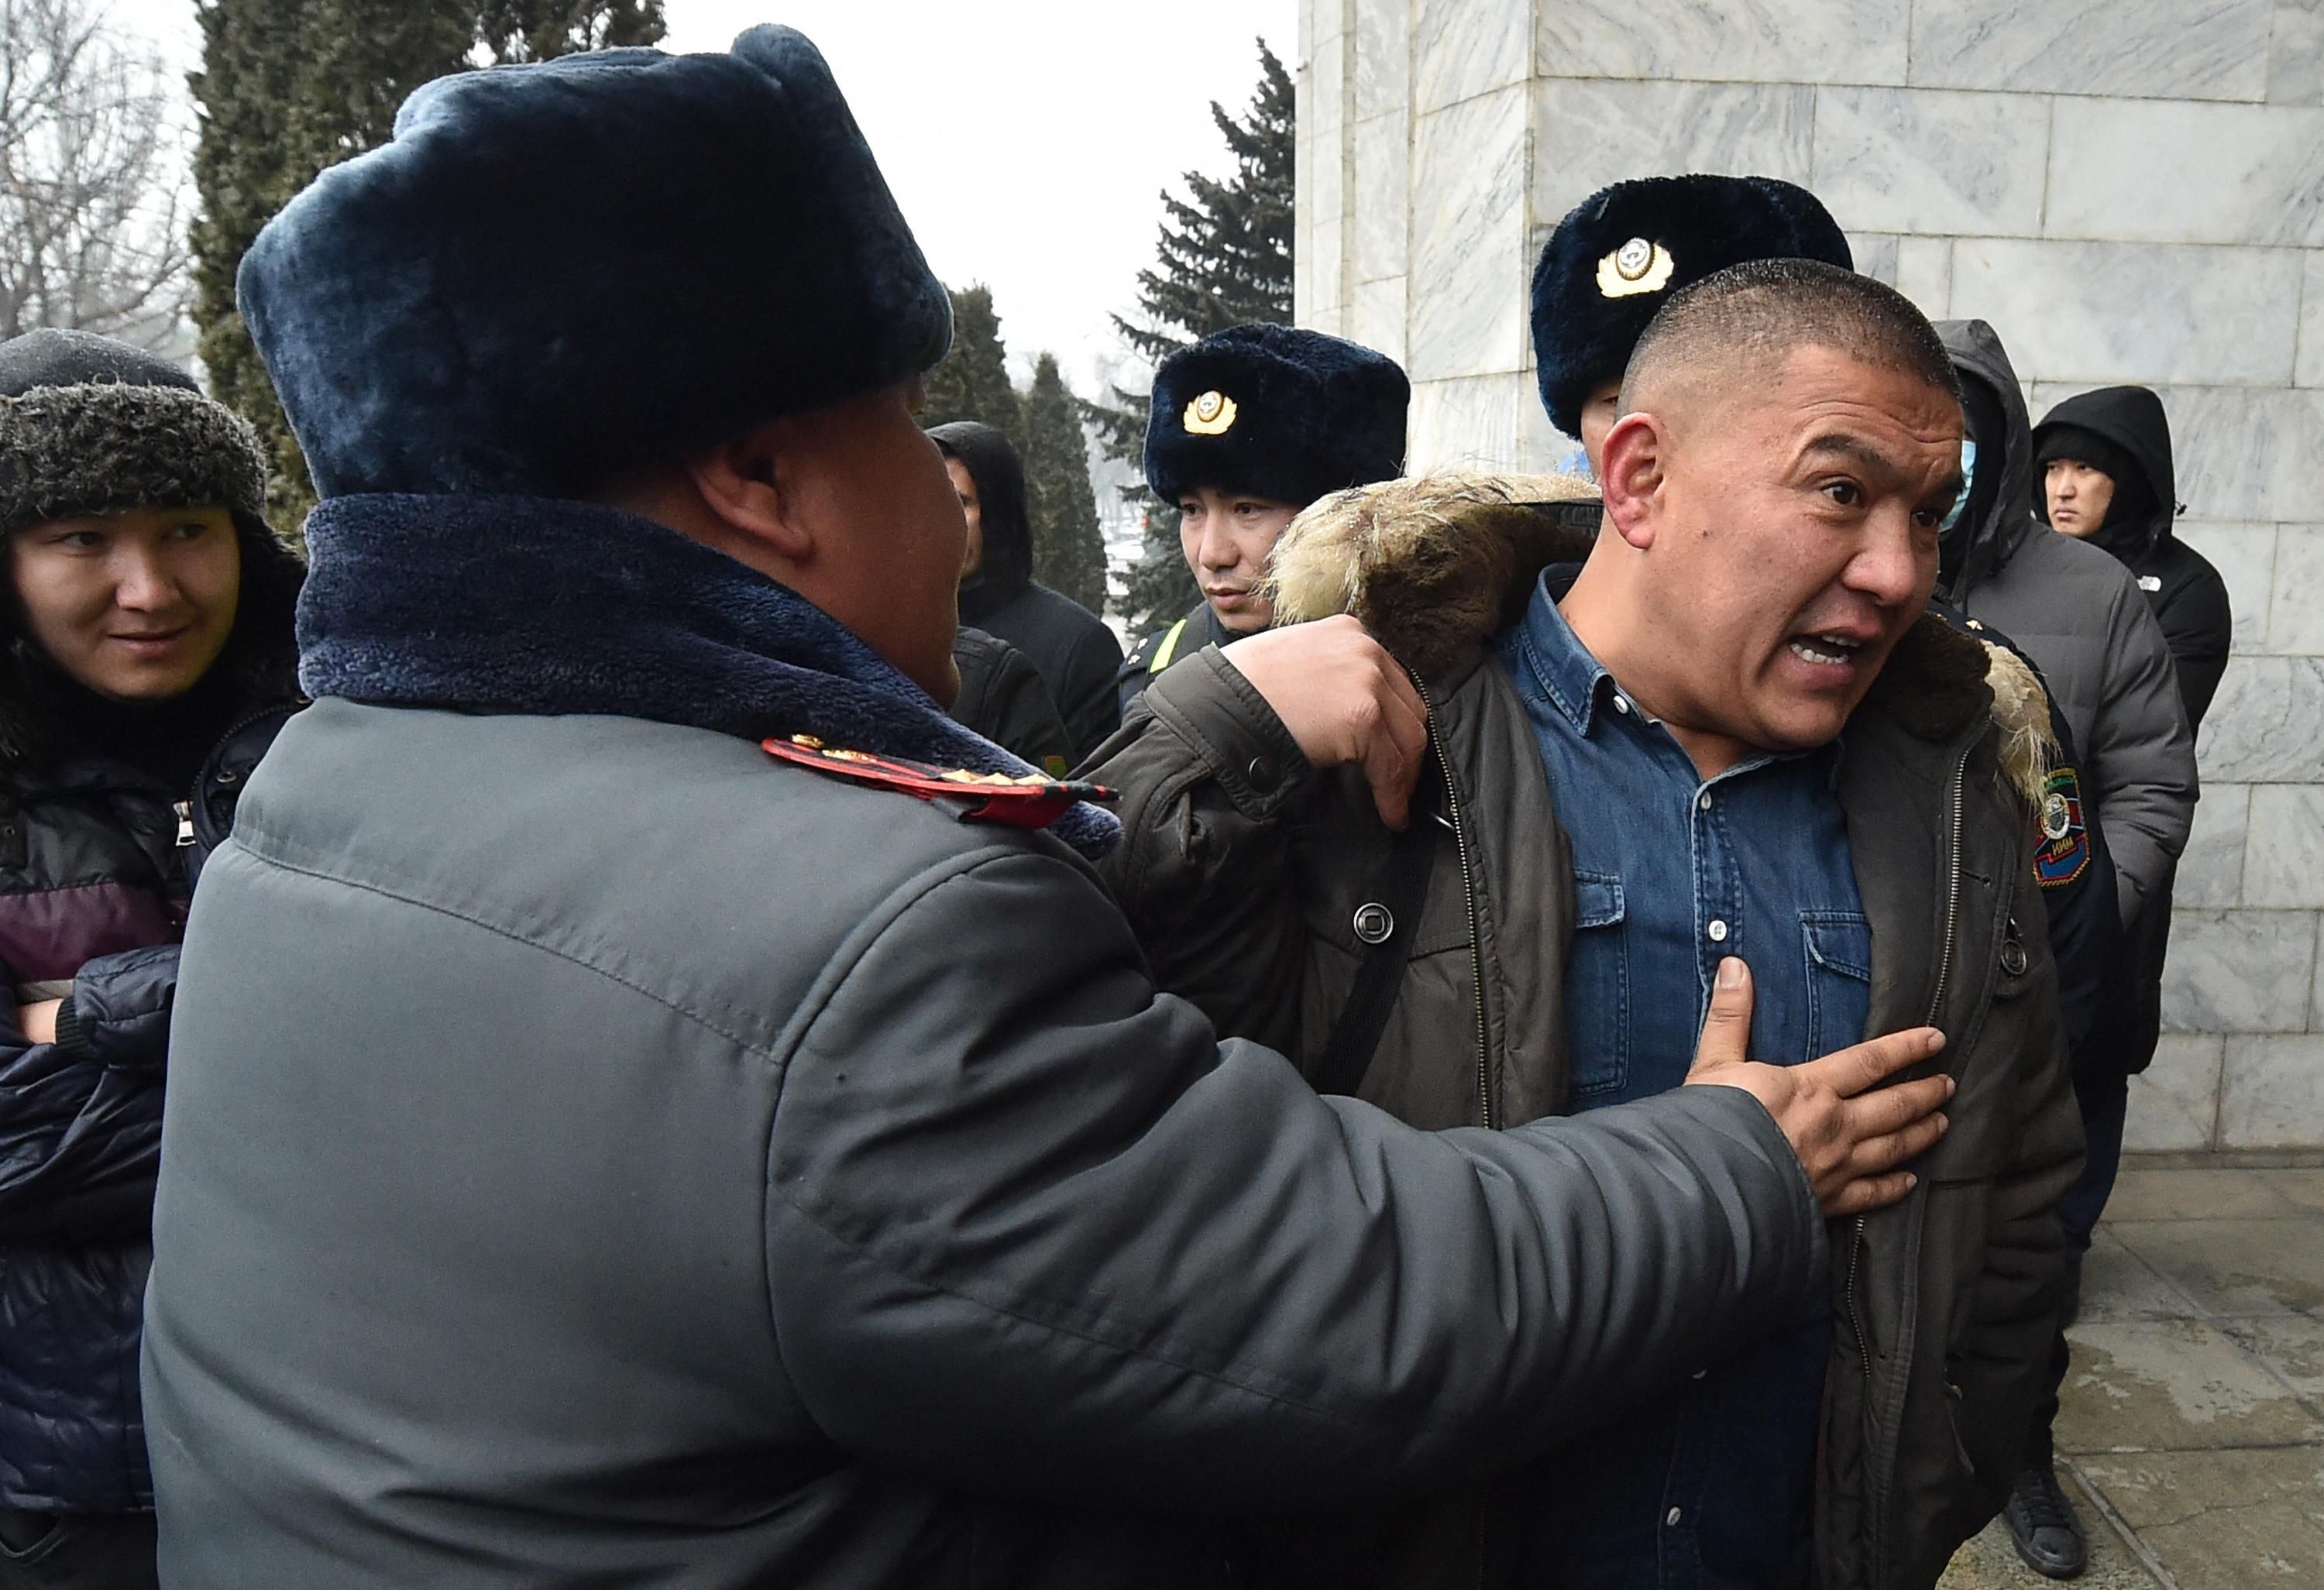 A protester is detained in Kazakhstan